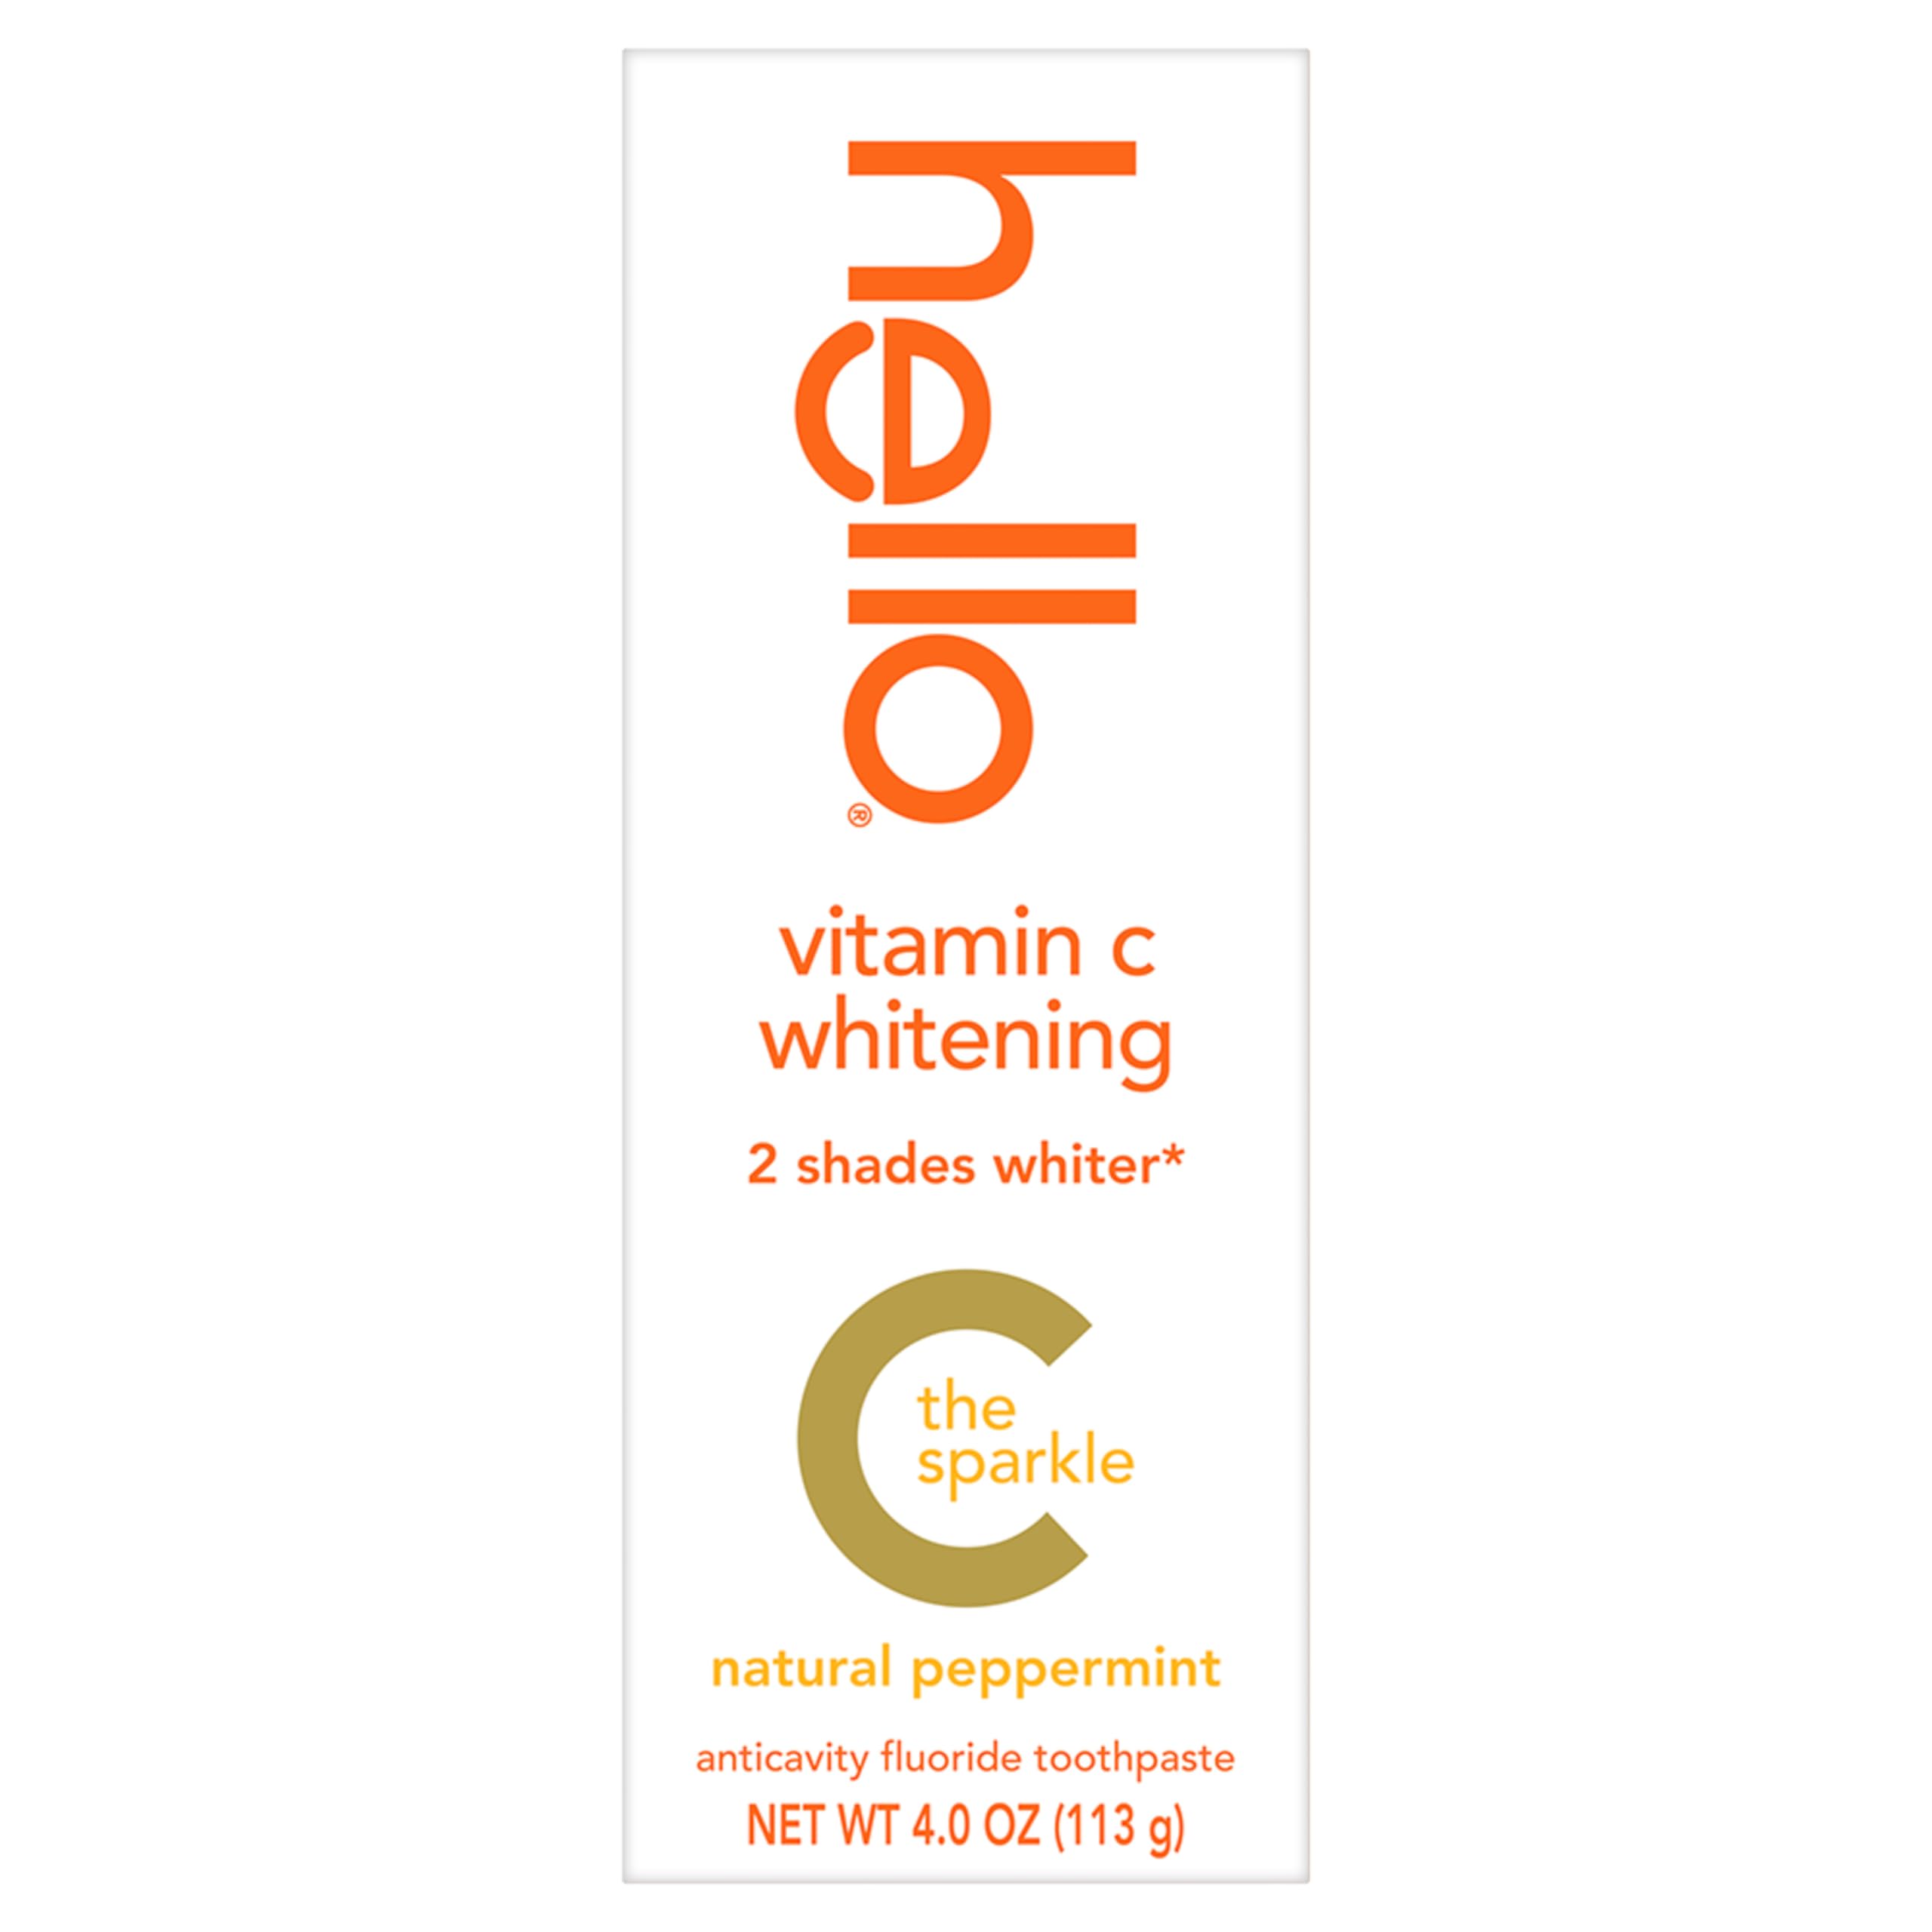 Hello Vitamin C Whitening Toothpaste with Fluoride, Teeth Whitening Toothpaste for Adults, Helps Freshen Breath and Removes Surface Stains, SLS Free, Natural Peppermint Flavor, 4.0 oz Tube